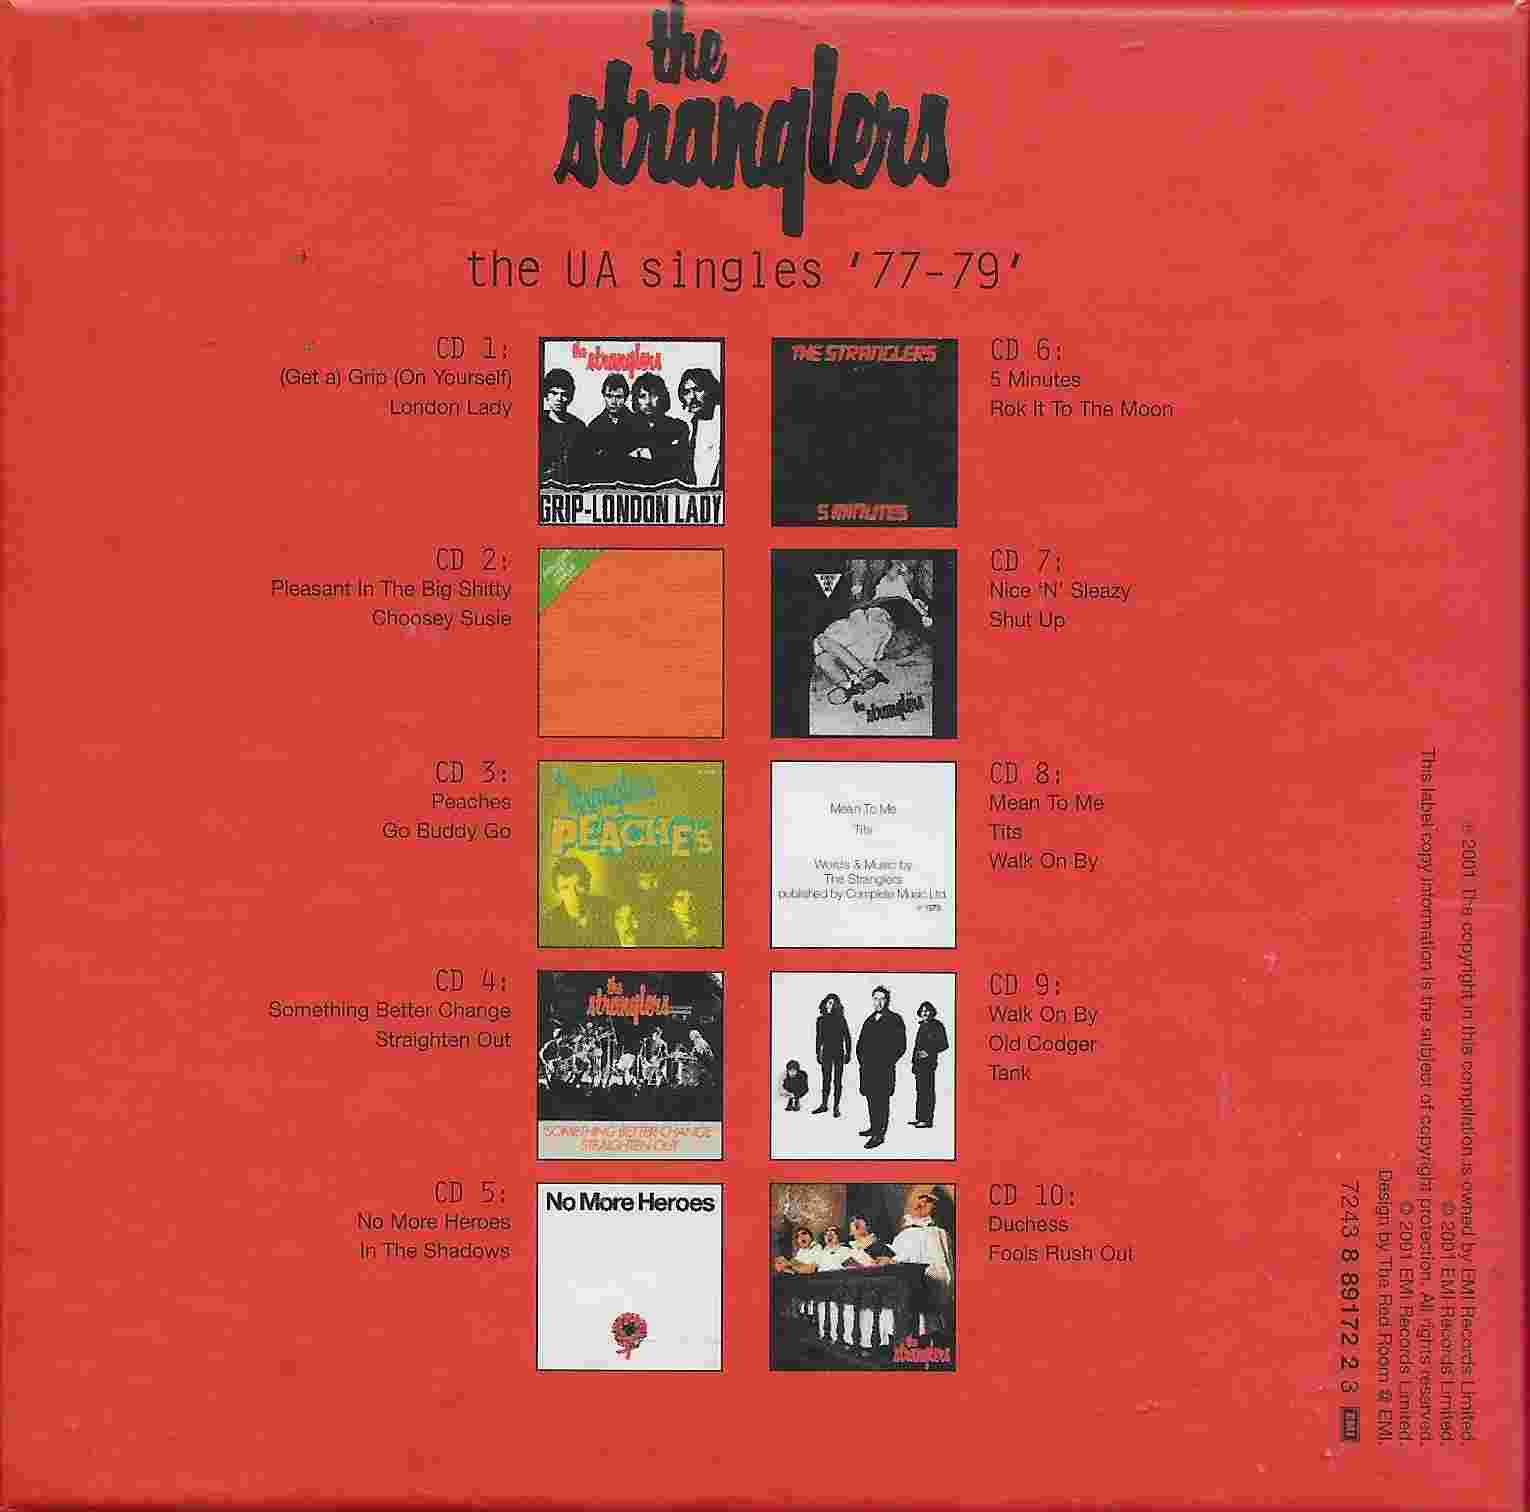 Picture of 889172 2 The UA singles 1977-1979 by artist The Stranglers  from The Stranglers